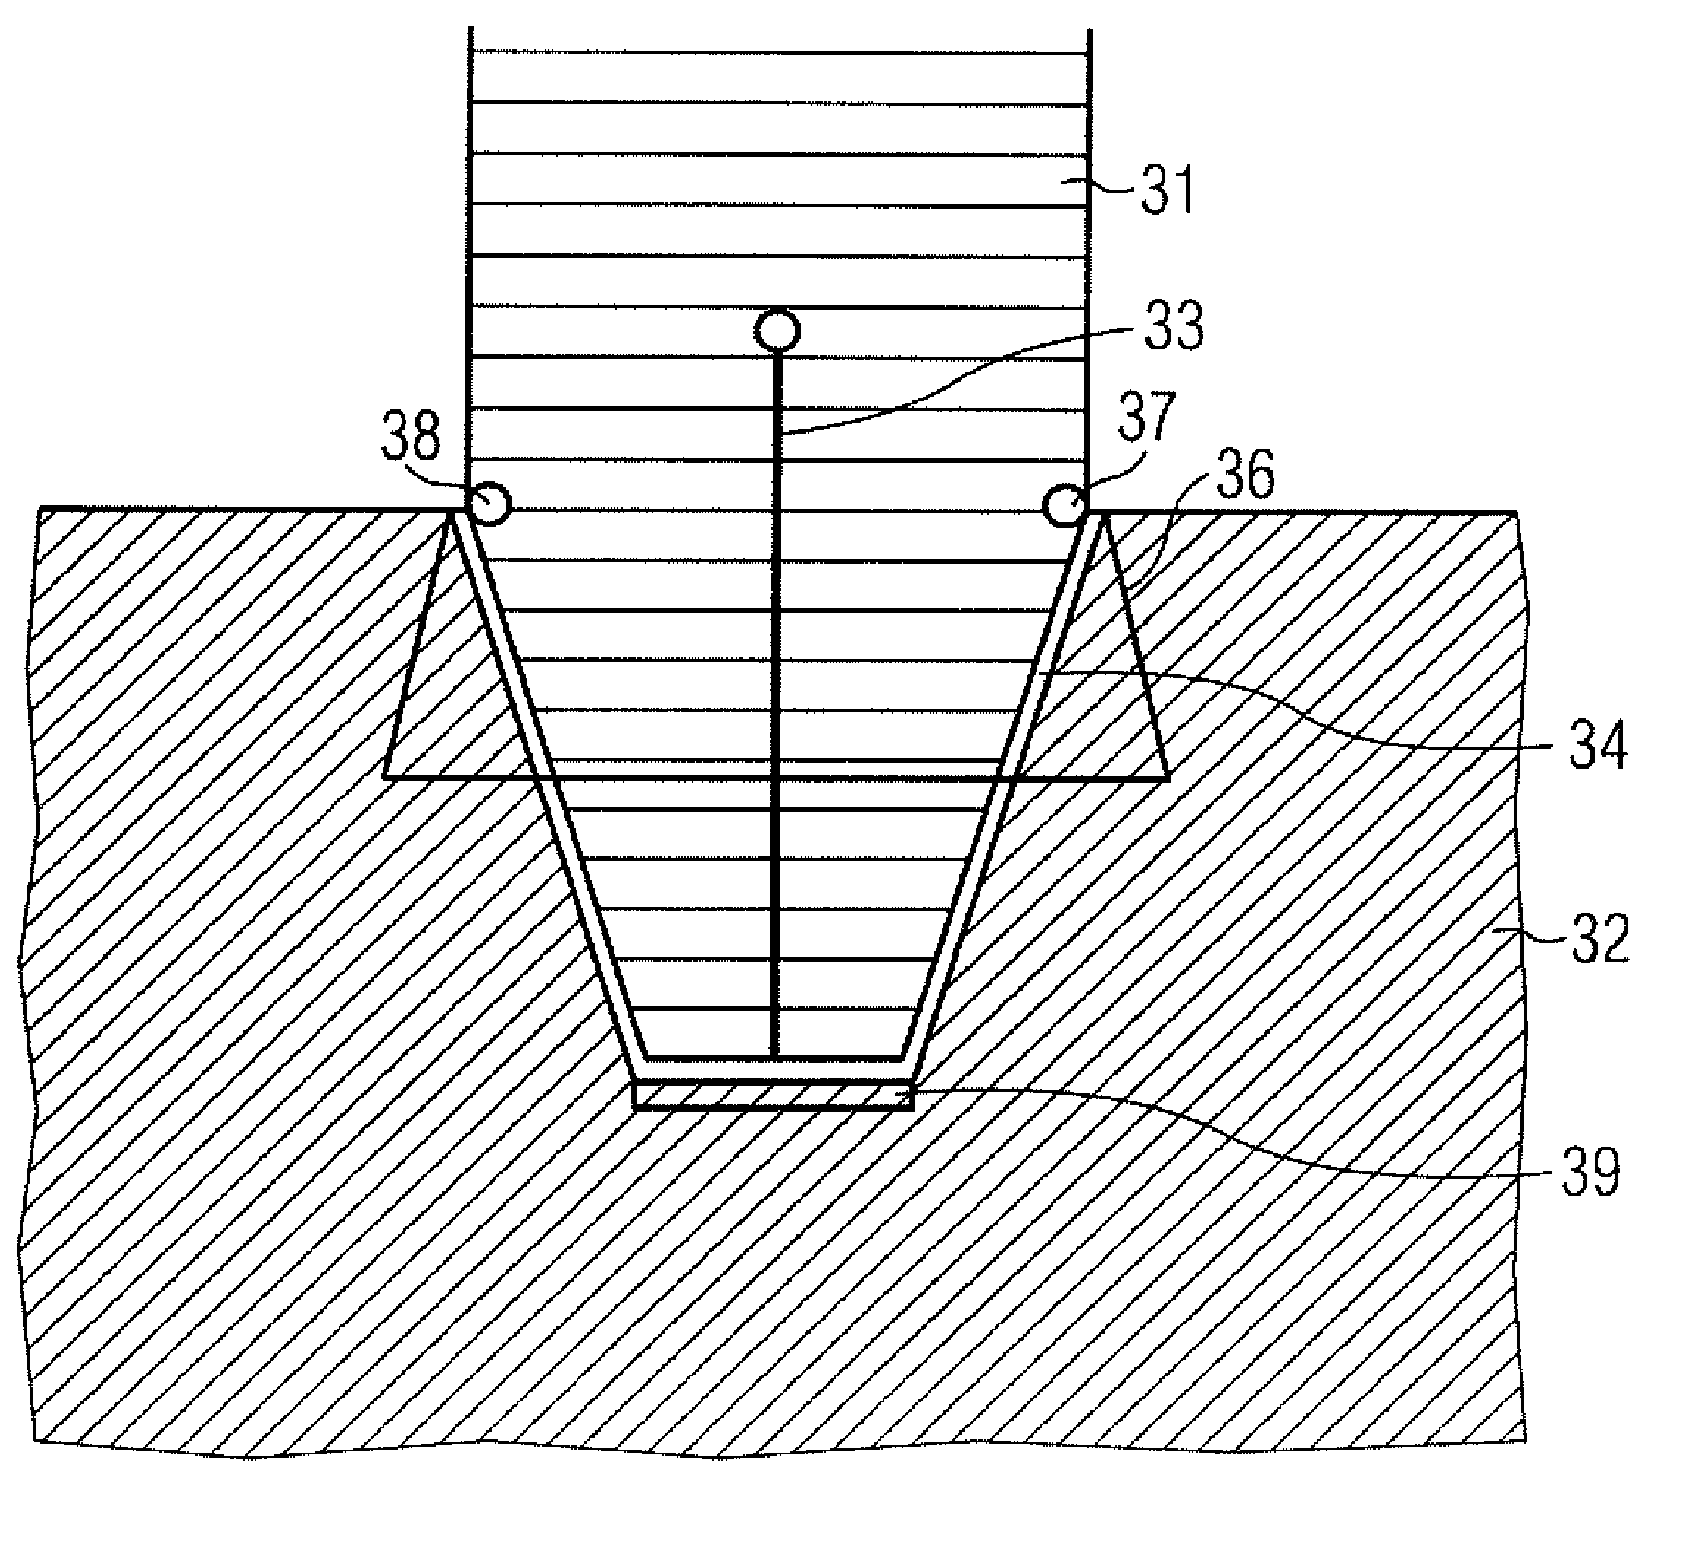 Potential control for high-voltage devices